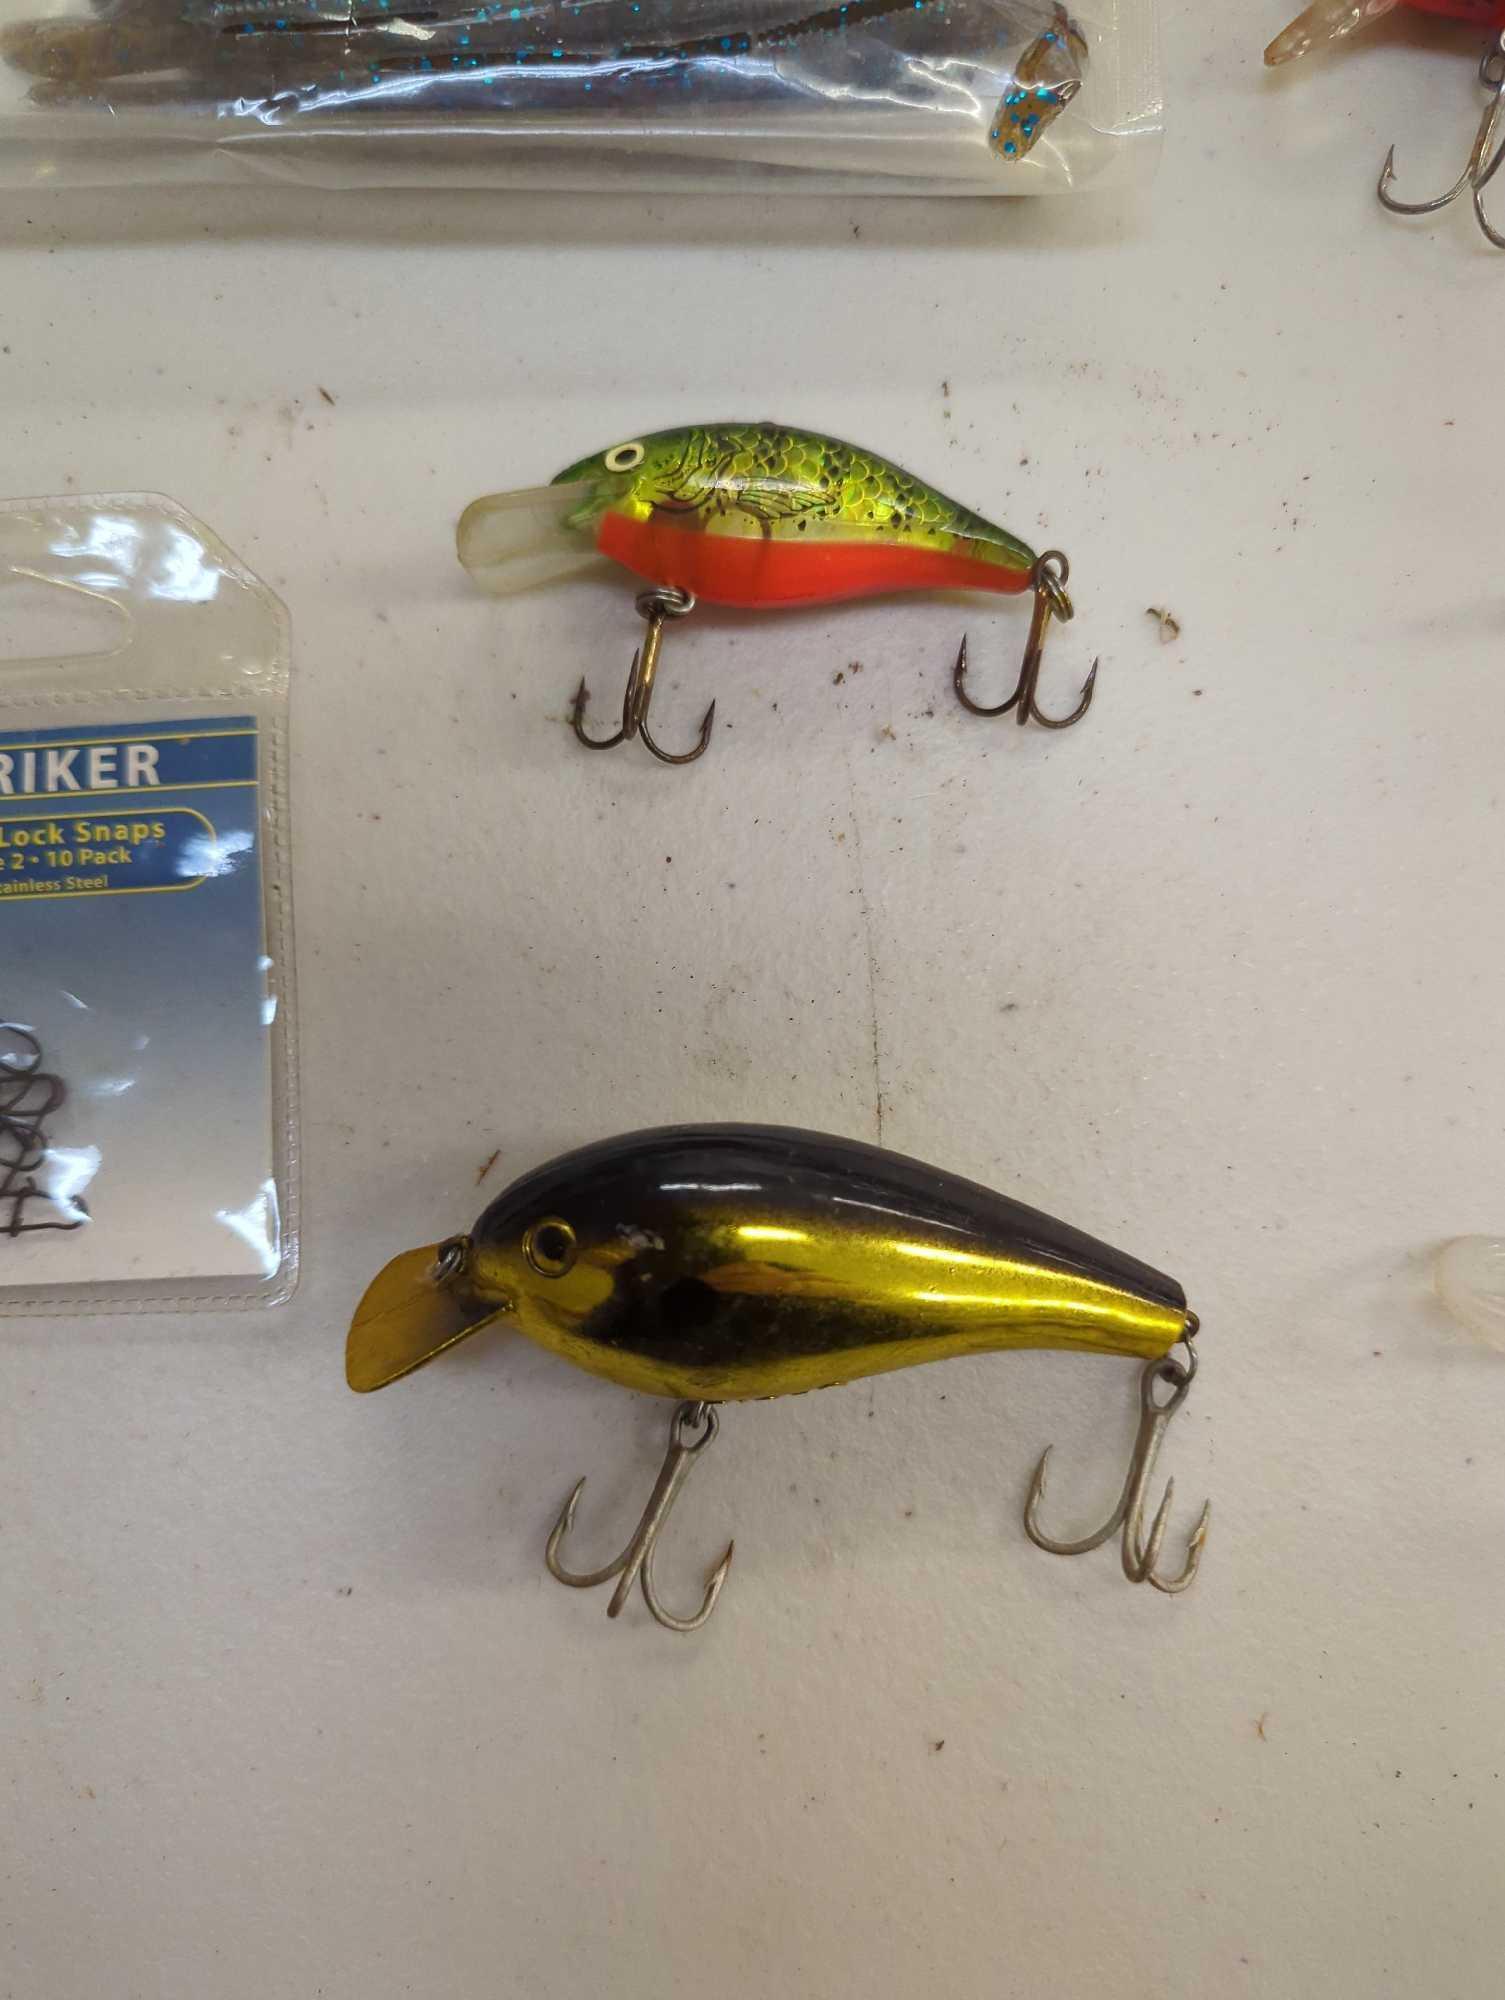 Tackle Box and contents including worms and other various fishing lures. Comes as is shown in